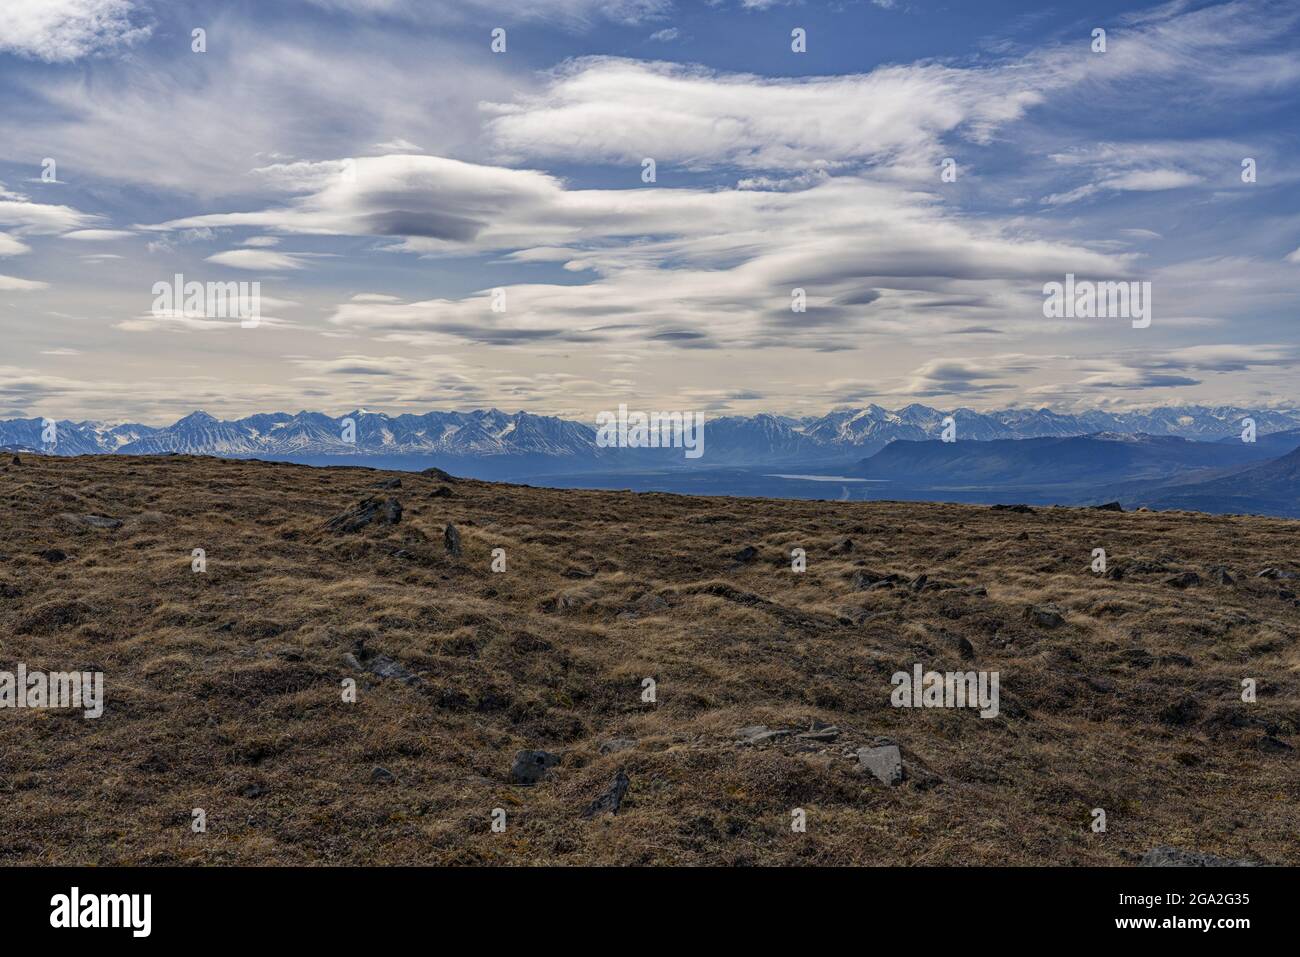 Brown, grassy vegetation and rocks sticking up from the tundra in front of a silhouetted mountain range with a cloudy blue sky Stock Photo